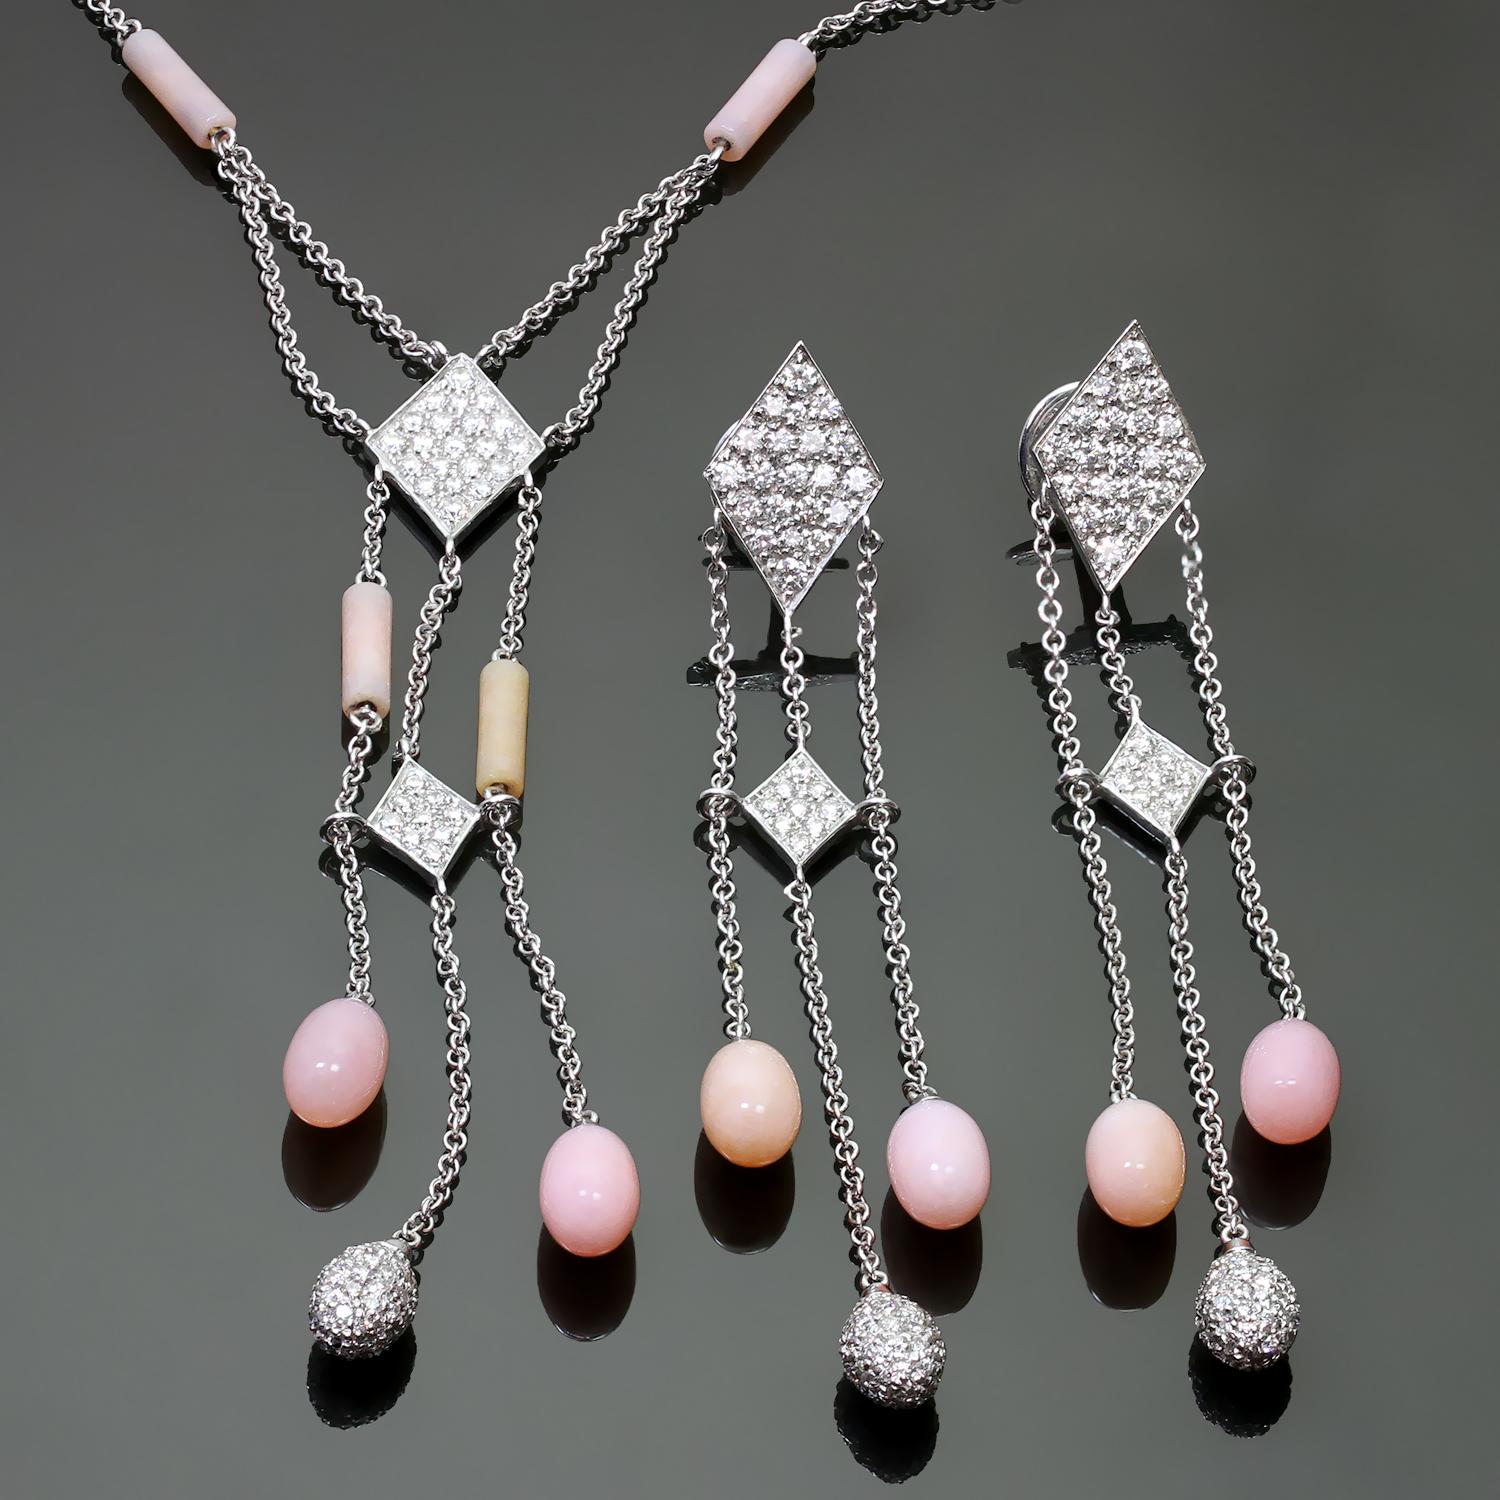 The gorgeous Luca Carati jewelry suite is crafted in 18k white gold and includes a pair of drop earrings for pierced ears set with oval-shaped pink opal drops measuring 9.70mm x 6.00mm and full-cut diamonds of an estimated 3.0 carats, together with